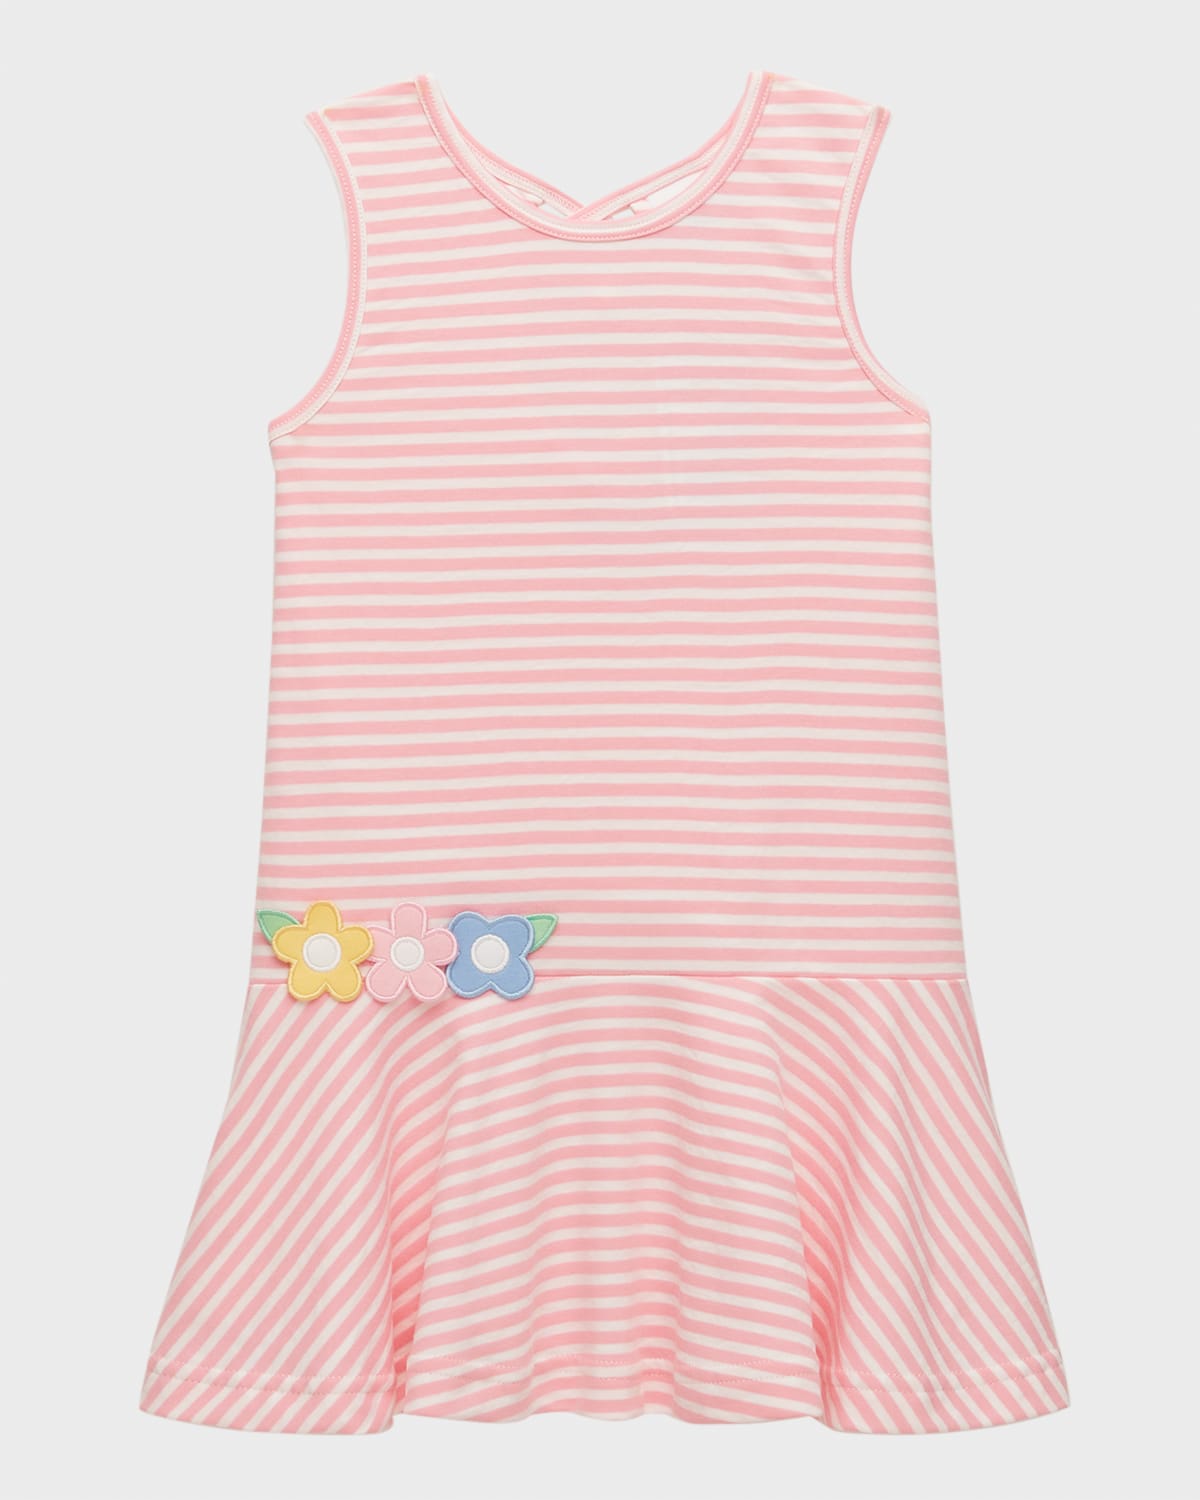 Florence Eiseman Babies' Girl's Striped Romper W/ Flowers In Pink/white